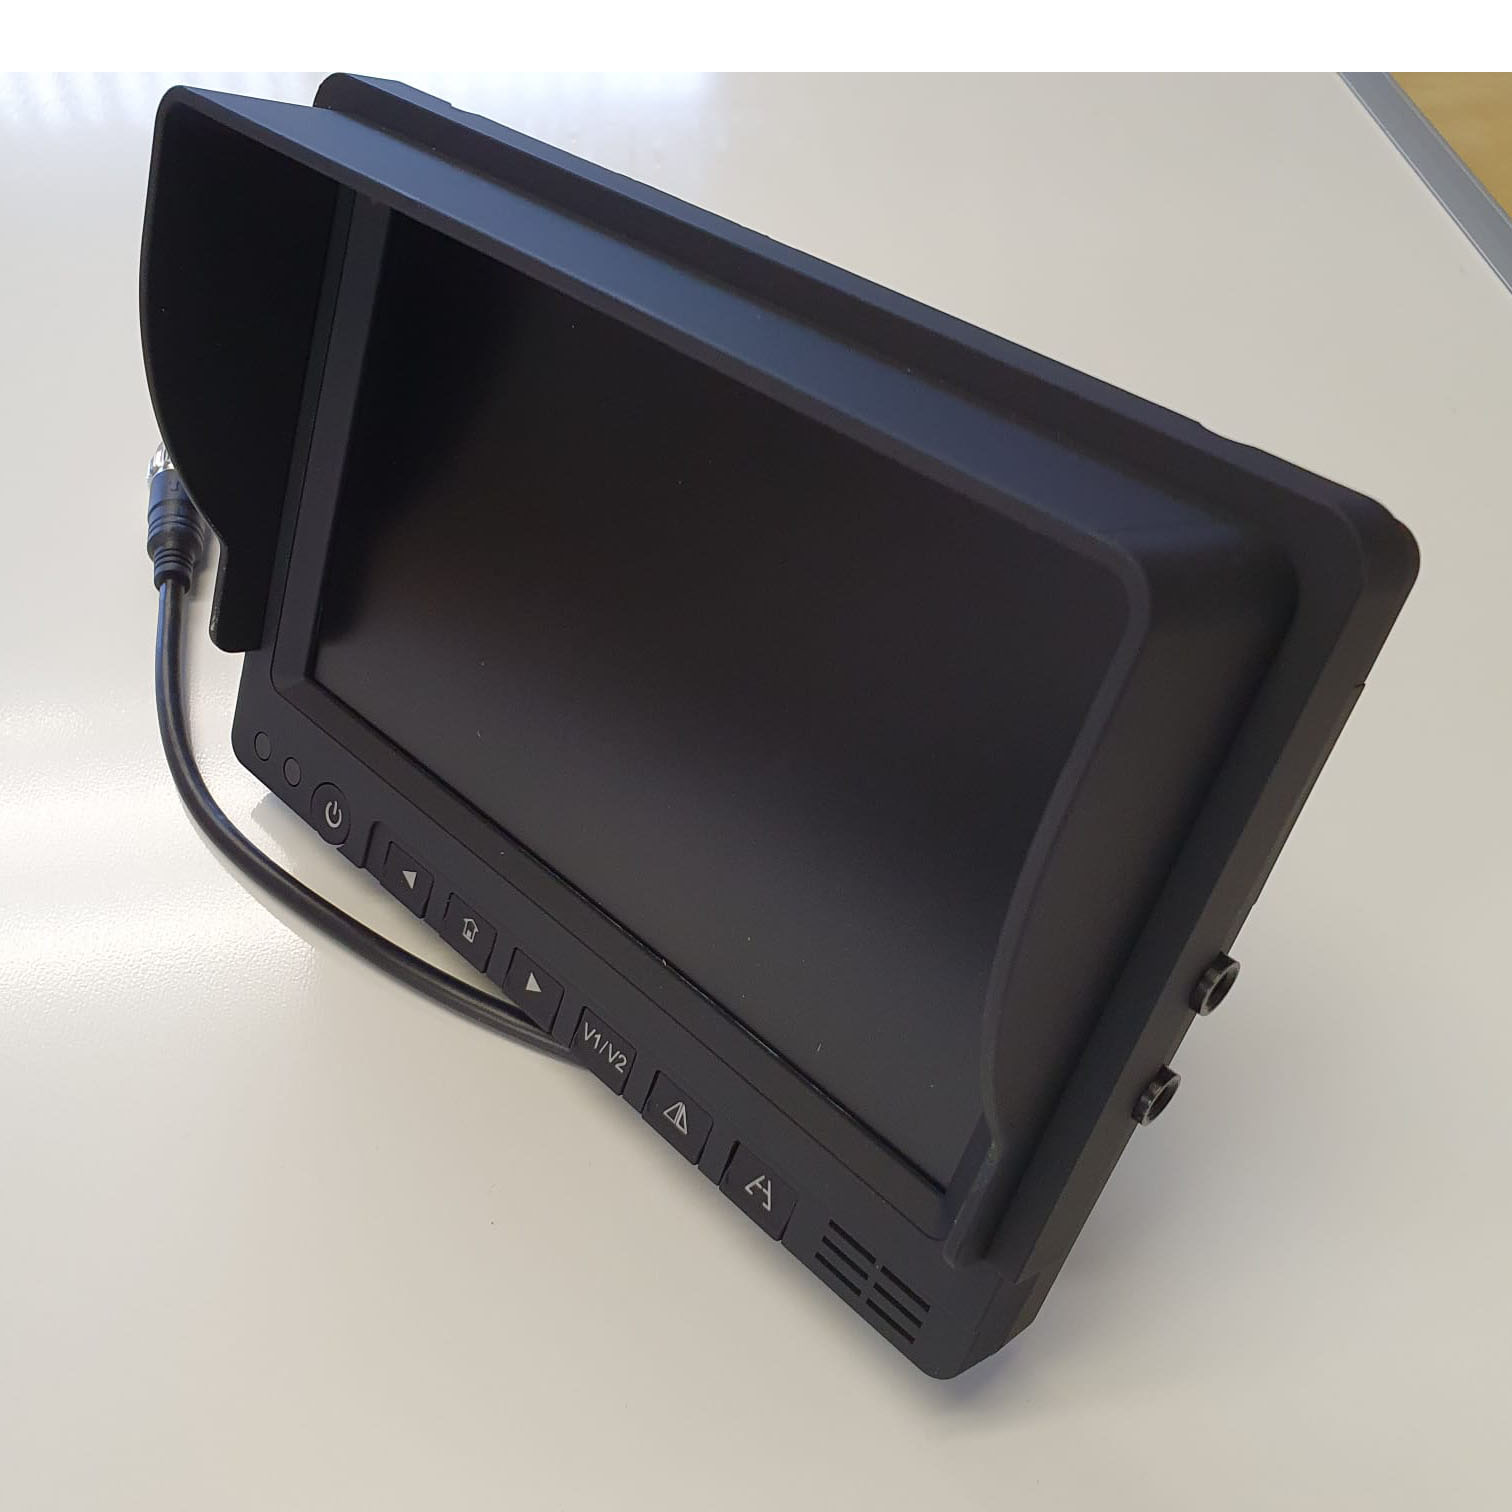 Side Image of BW712 AHD 7 inch Monitor